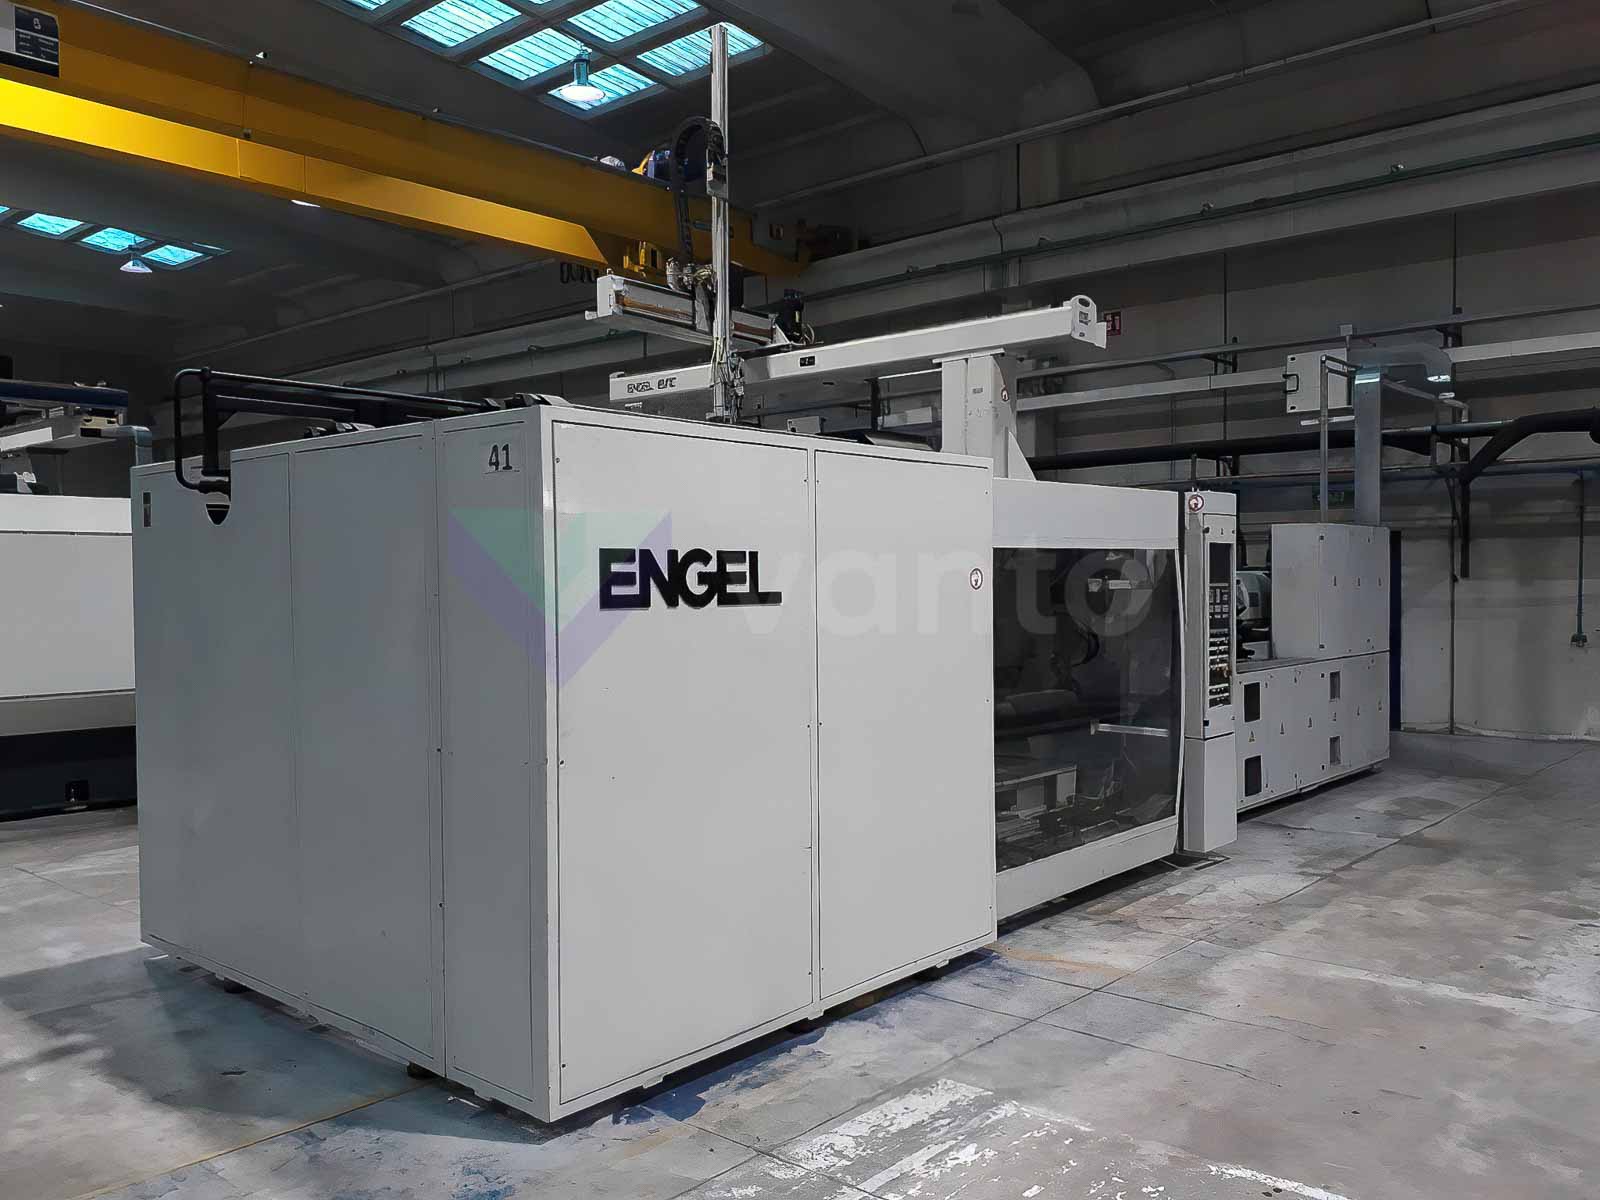 ENGEL ES 5550 / 800 DUO 800t injection molding machine (1997) id10655